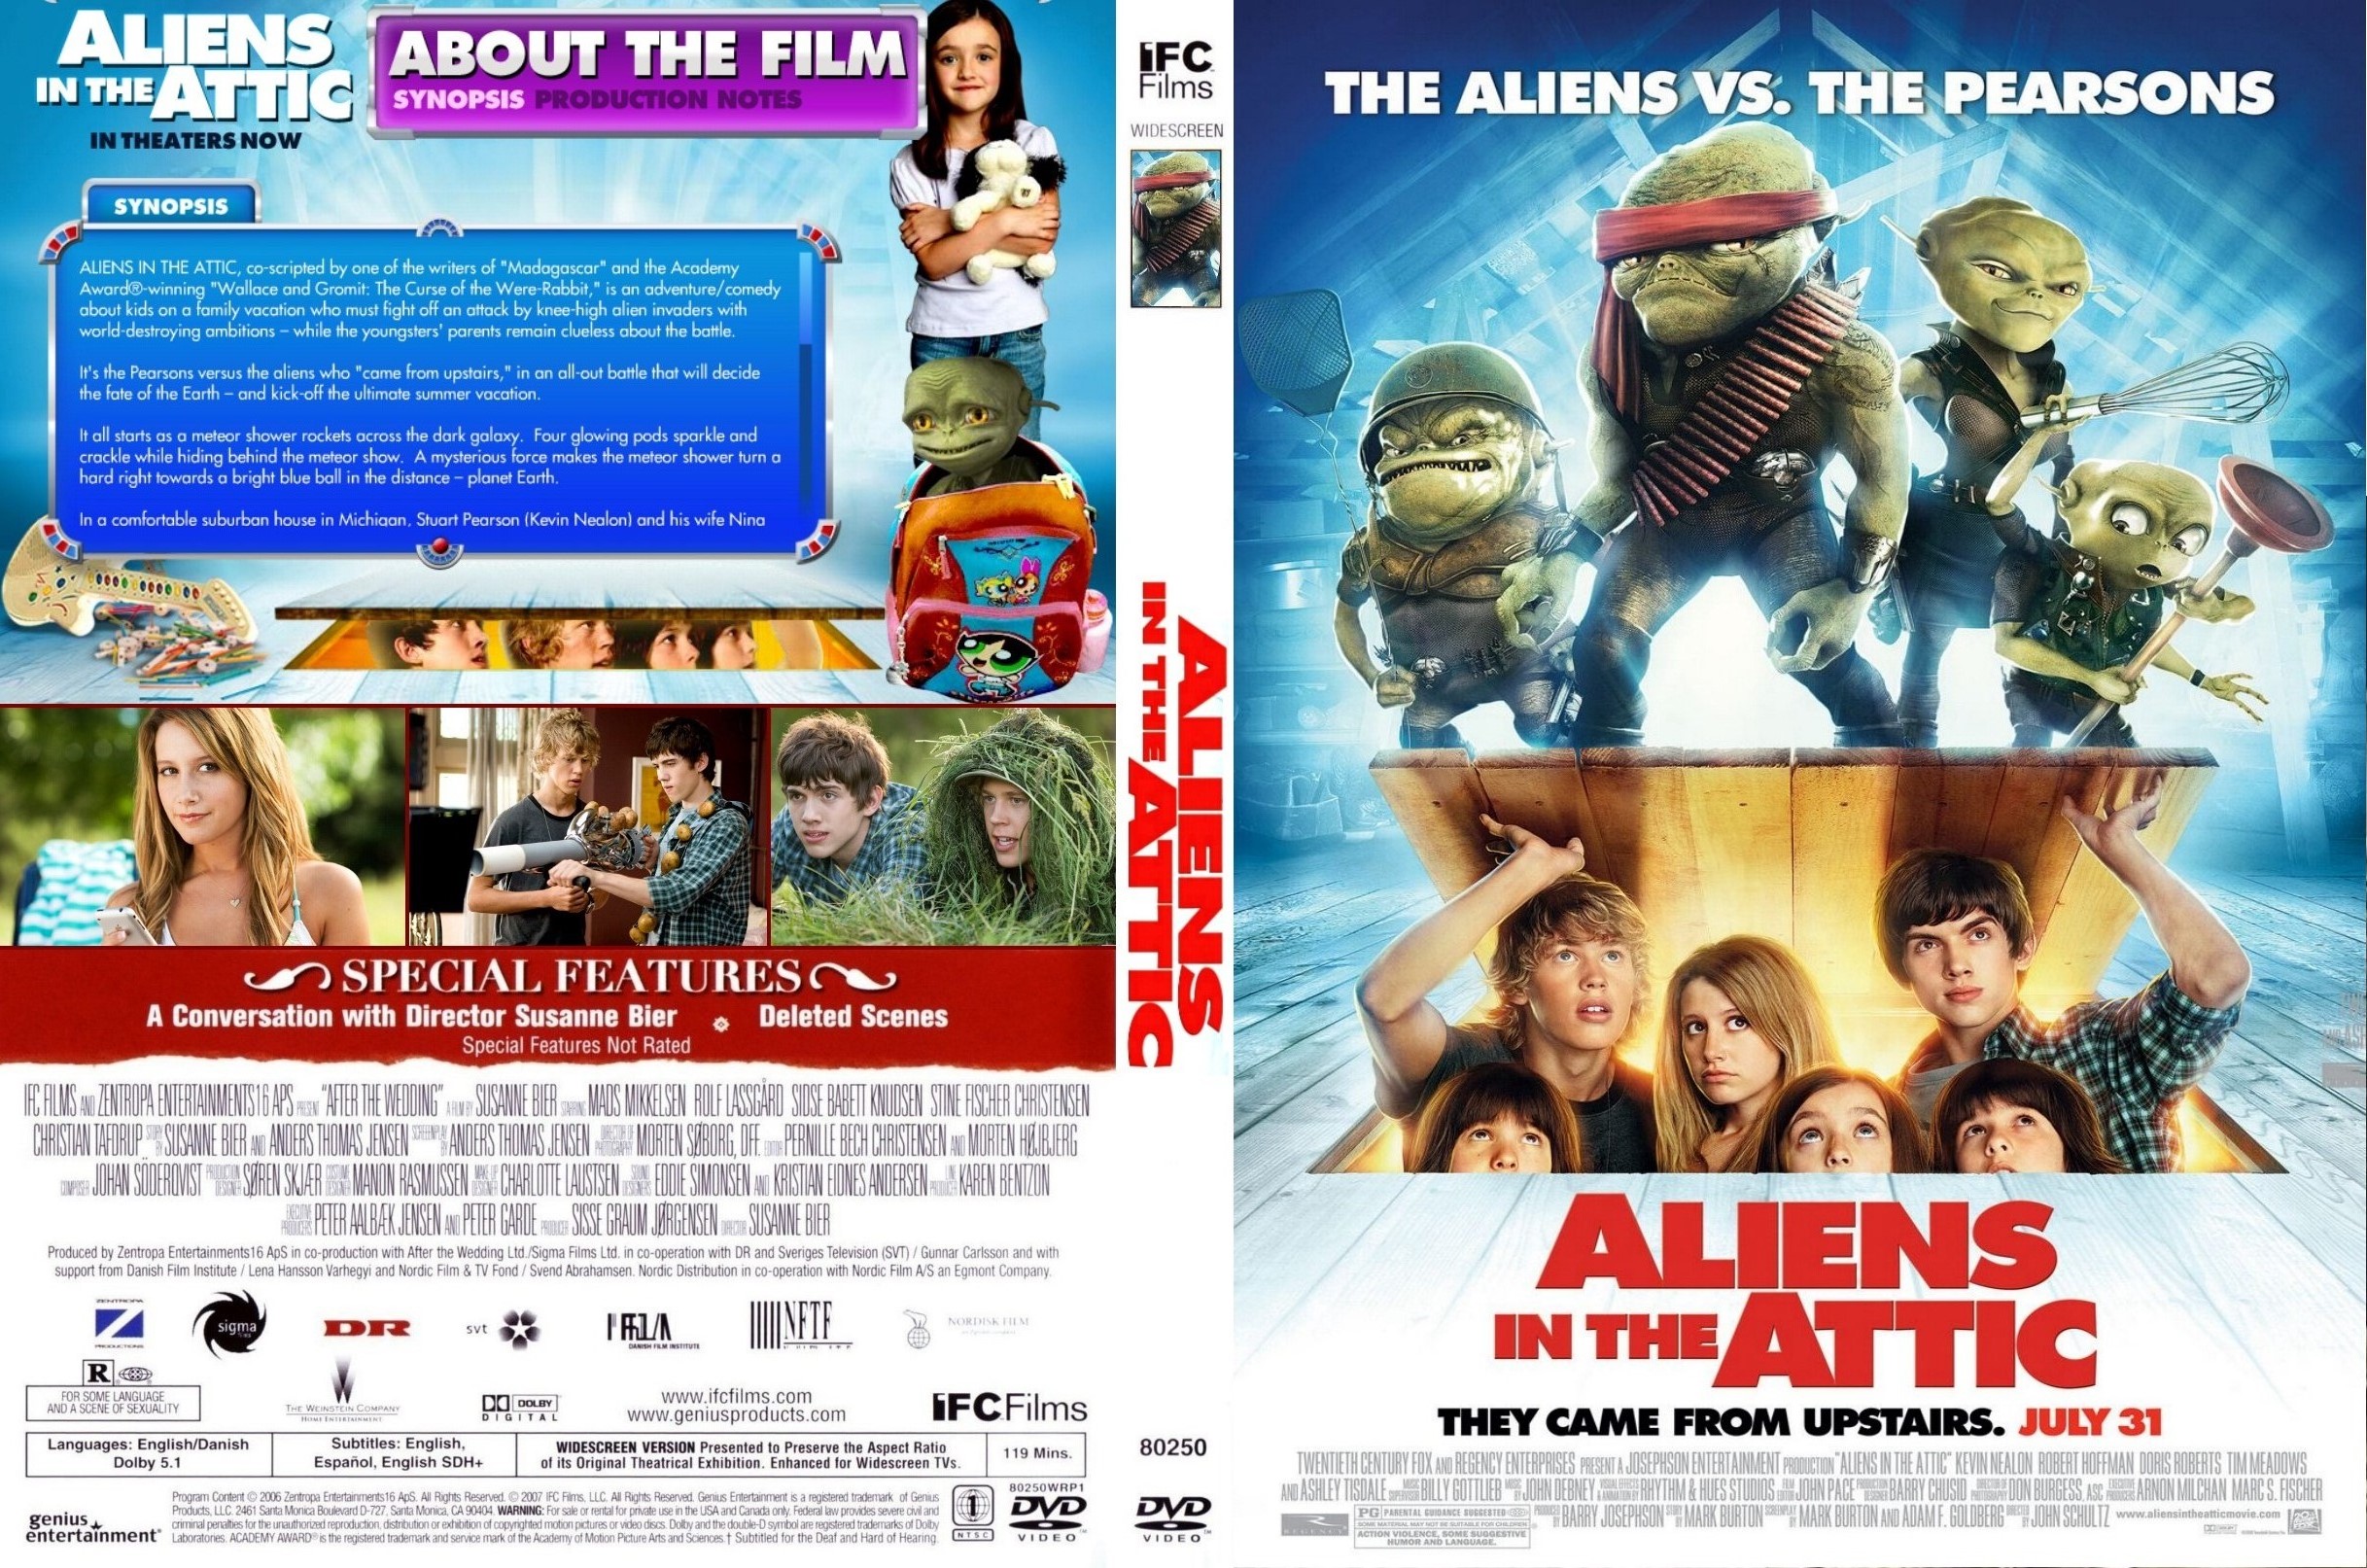 Jaquette DVD Aliens in the attic (Canadienne)